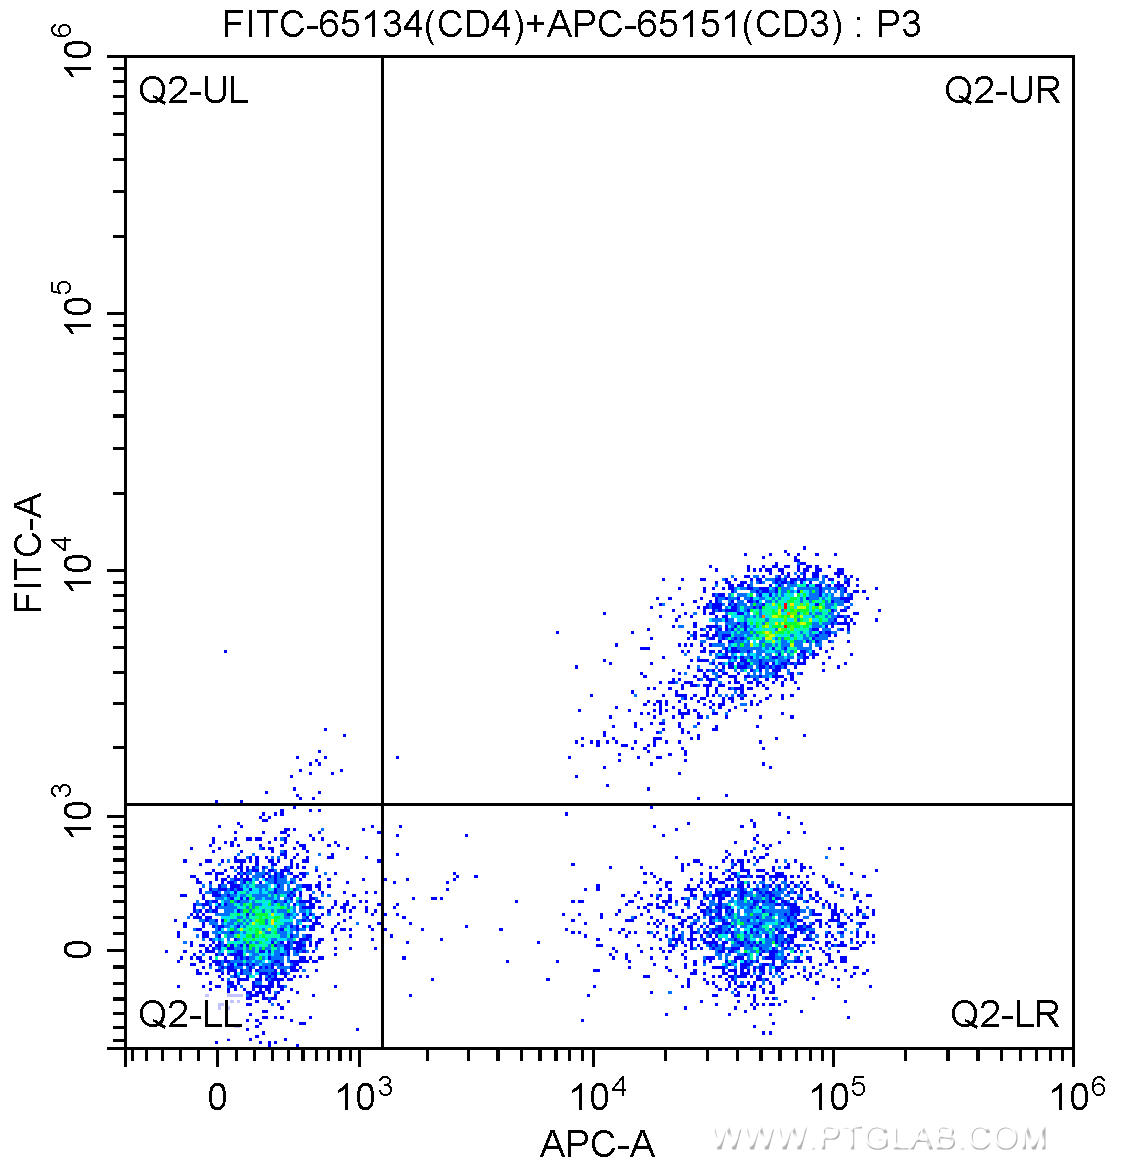 1X10^6 human peripheral blood lymphocytes were surface stained with APC Anti-Human CD3 (APC-65151, Clone: UCHT1) and 5.00 ul FITC Anti-Human CD4 (FITC-65134, Clone: OKT4). Cells were not fixed.